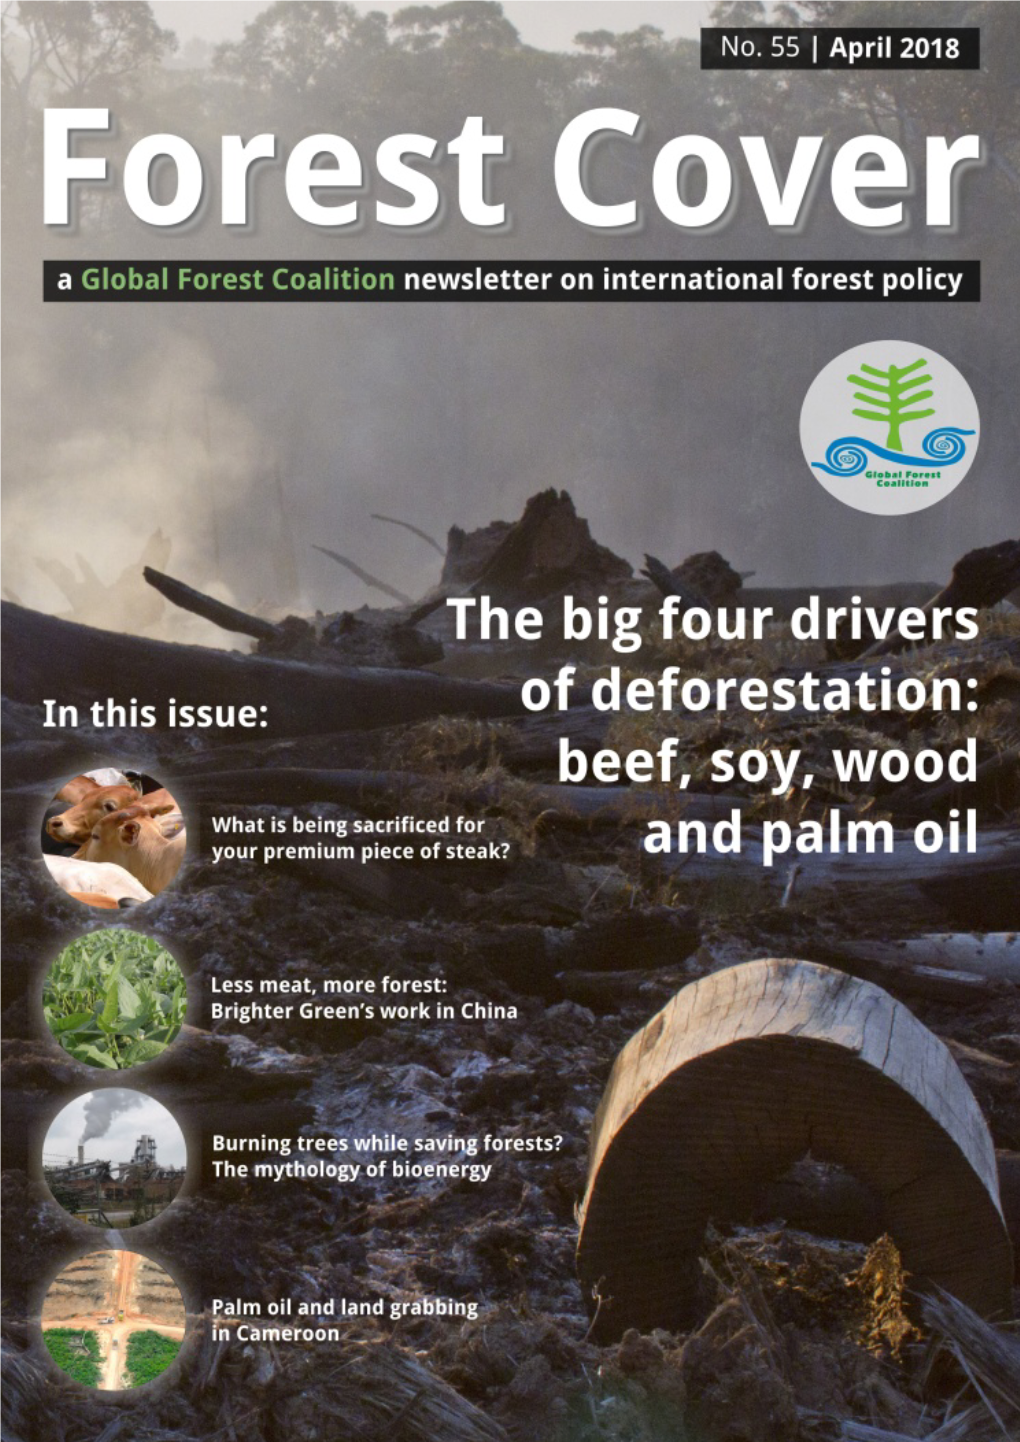 Forest Cover: a Global Forest Coalition Newsletter on International Forest Policy April 2018 the Big Four Drivers of Deforestation 2